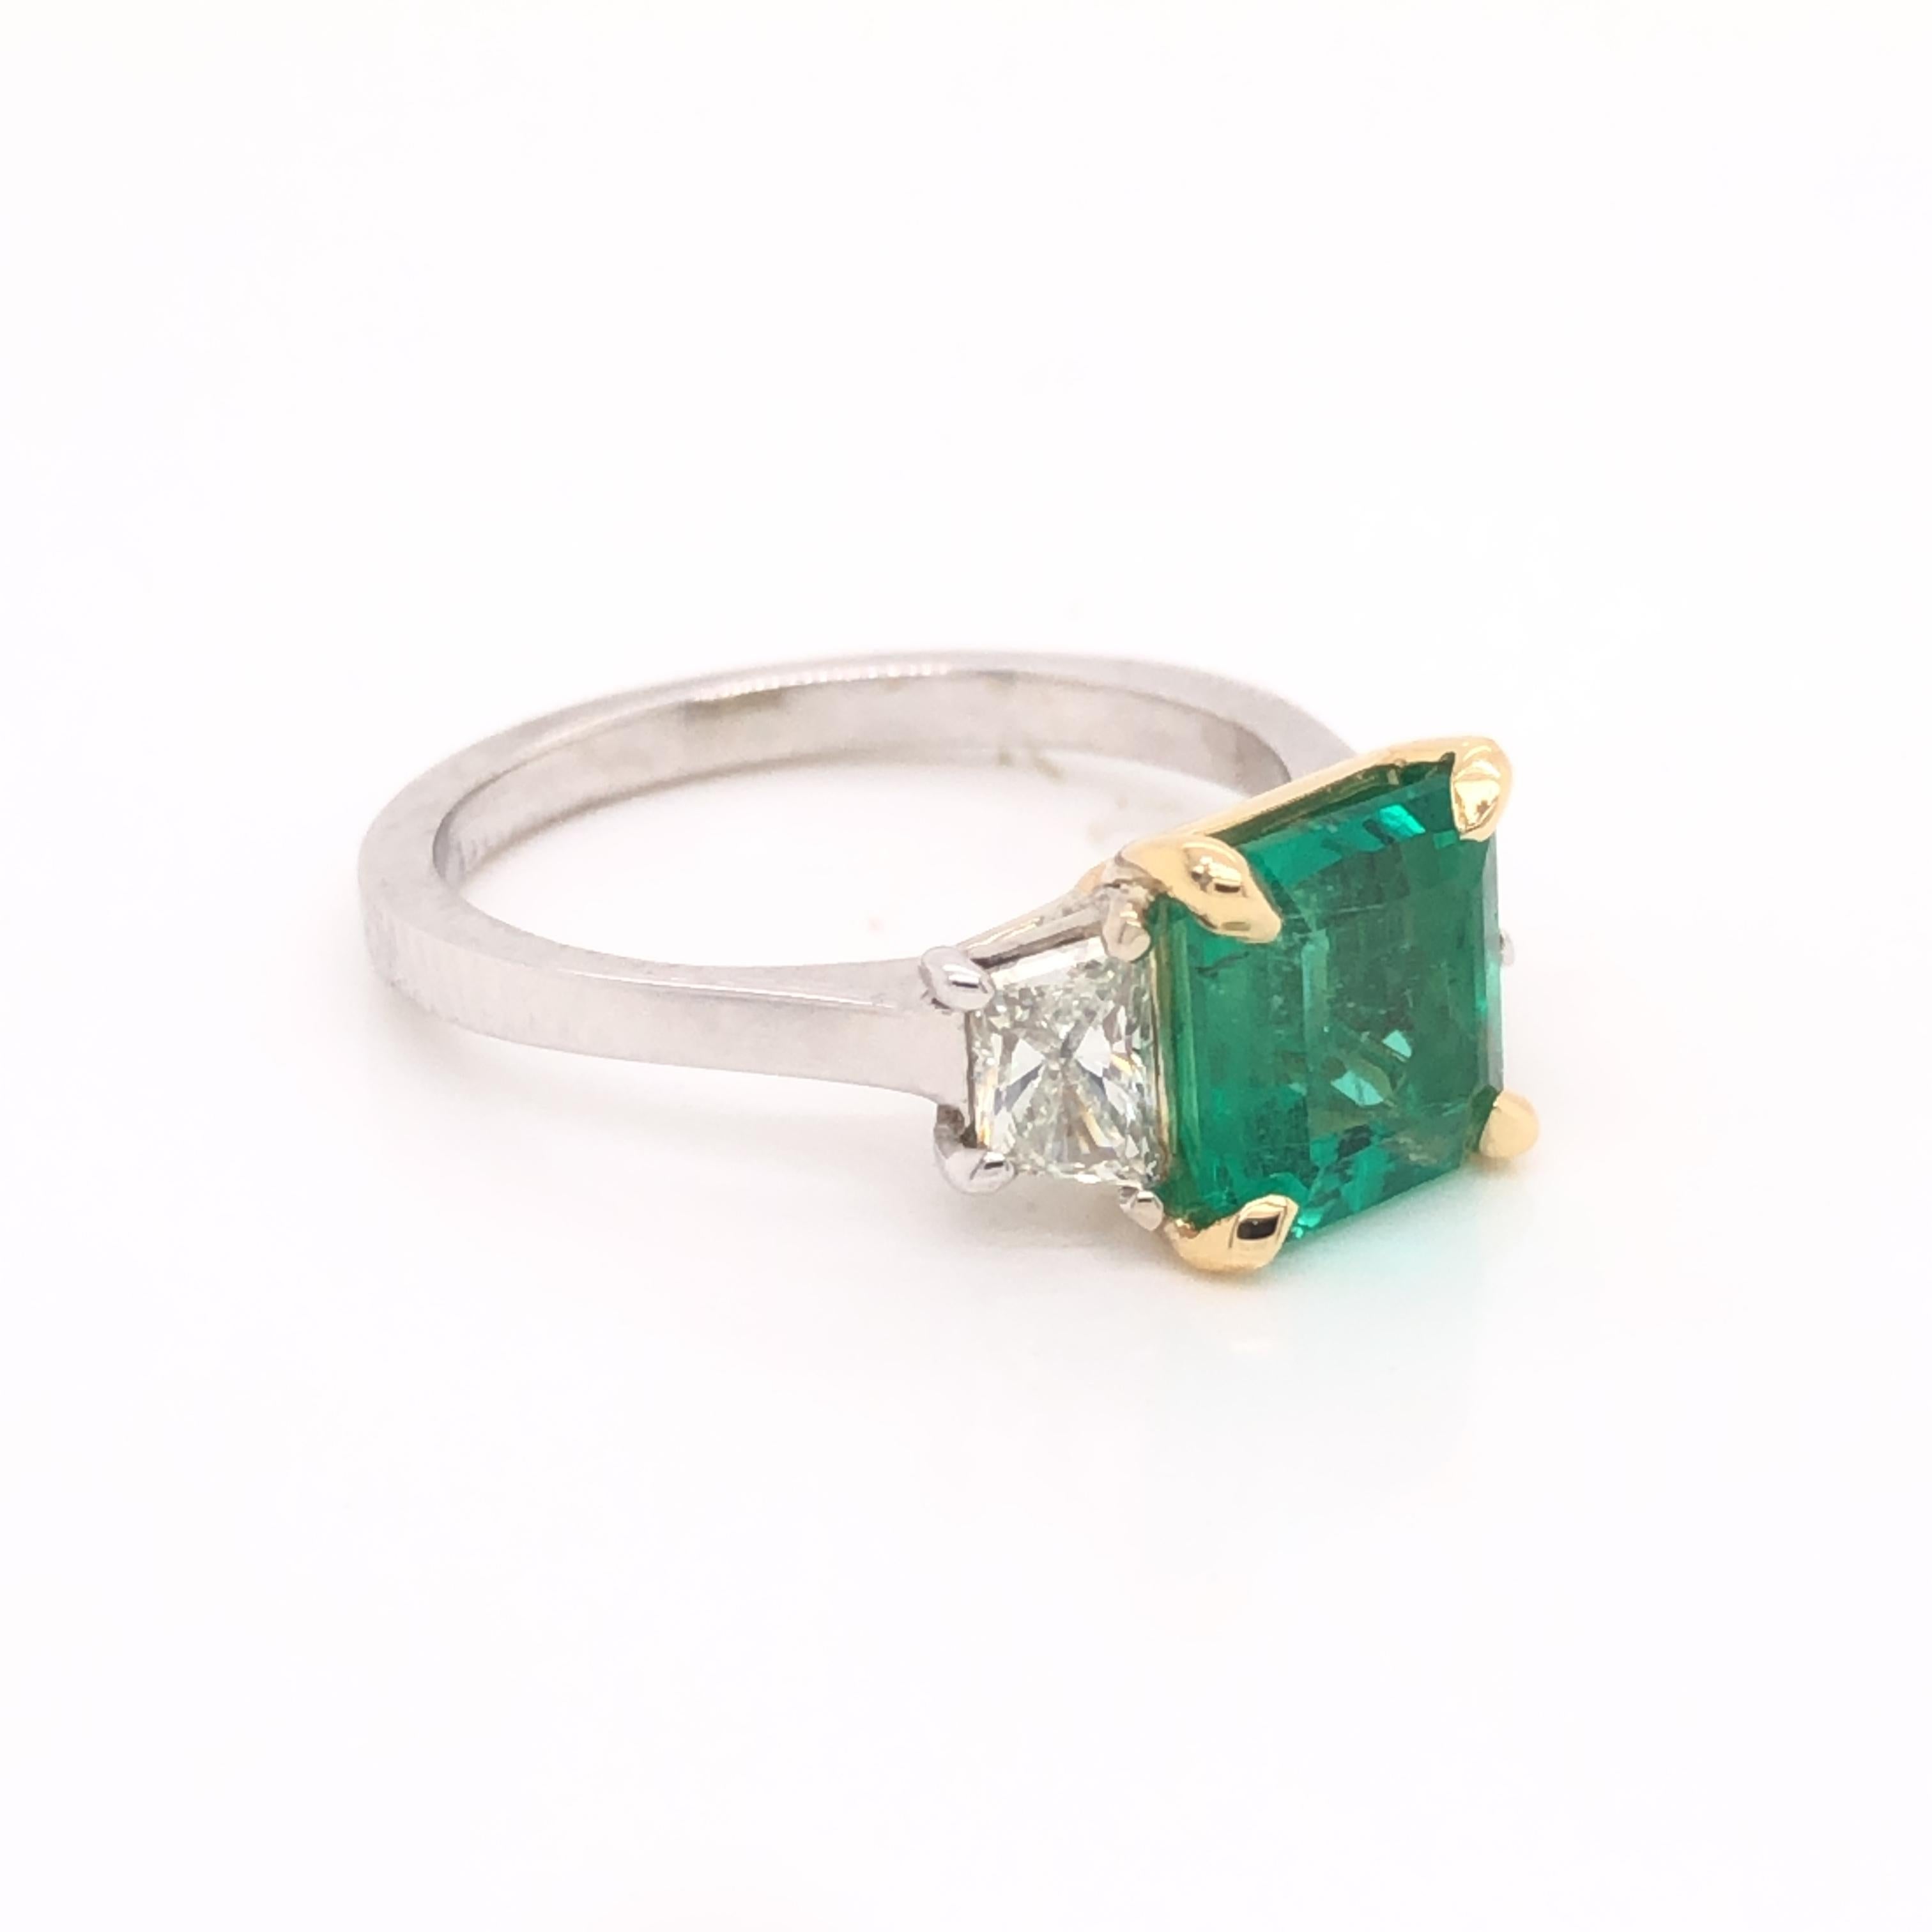 One phenomenal ring crafted in 18k white gold. The ring is highlighted with one emerald gemstone showing an emerald cut. The gemstone shows a vivid green color as it is Colombian in origin. Colombia is known to produce the highest quality emerald